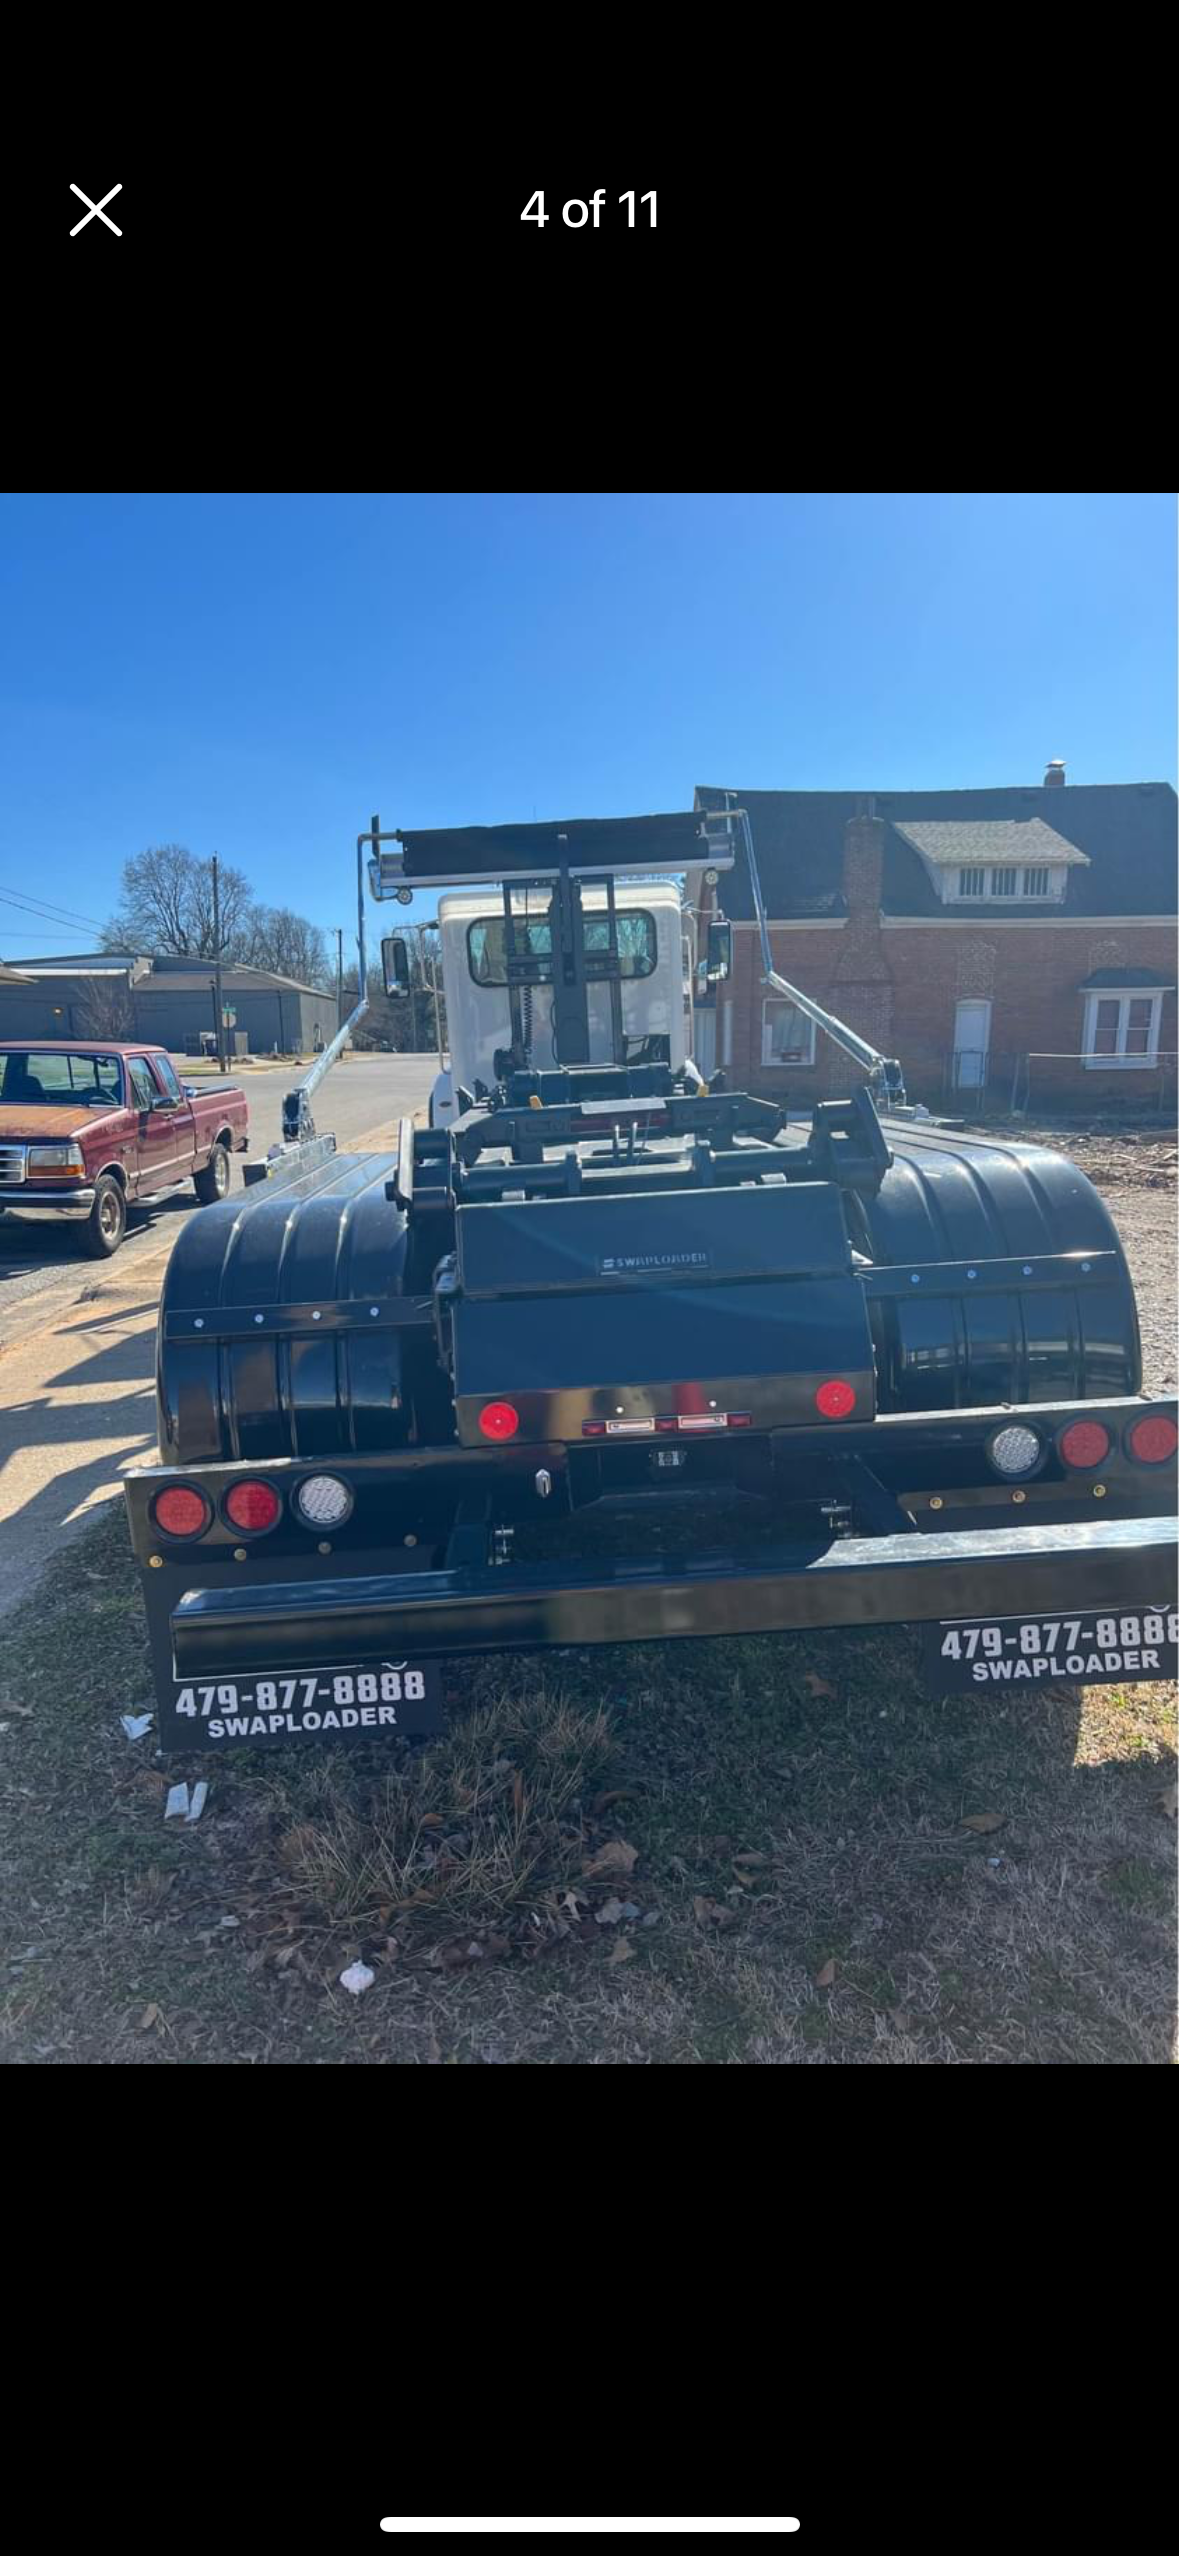 A black tow truck is parked in a parking lot next to a brick building.